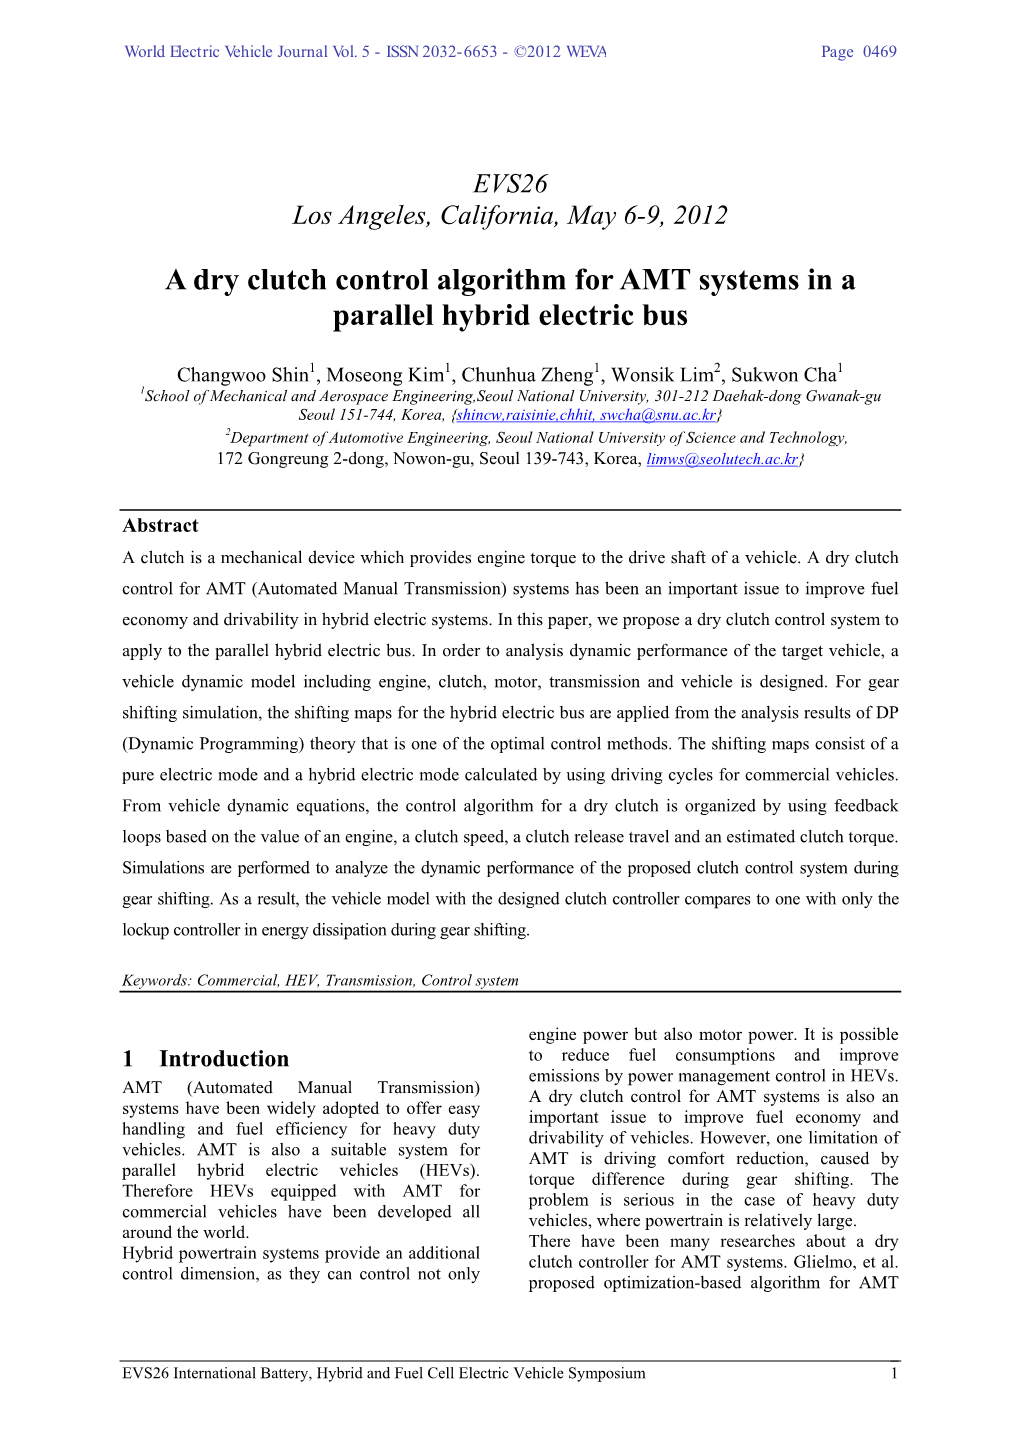 A Dry Clutch Control Algorithm for AMT Systems in a Parallel Hybrid Electric Bus